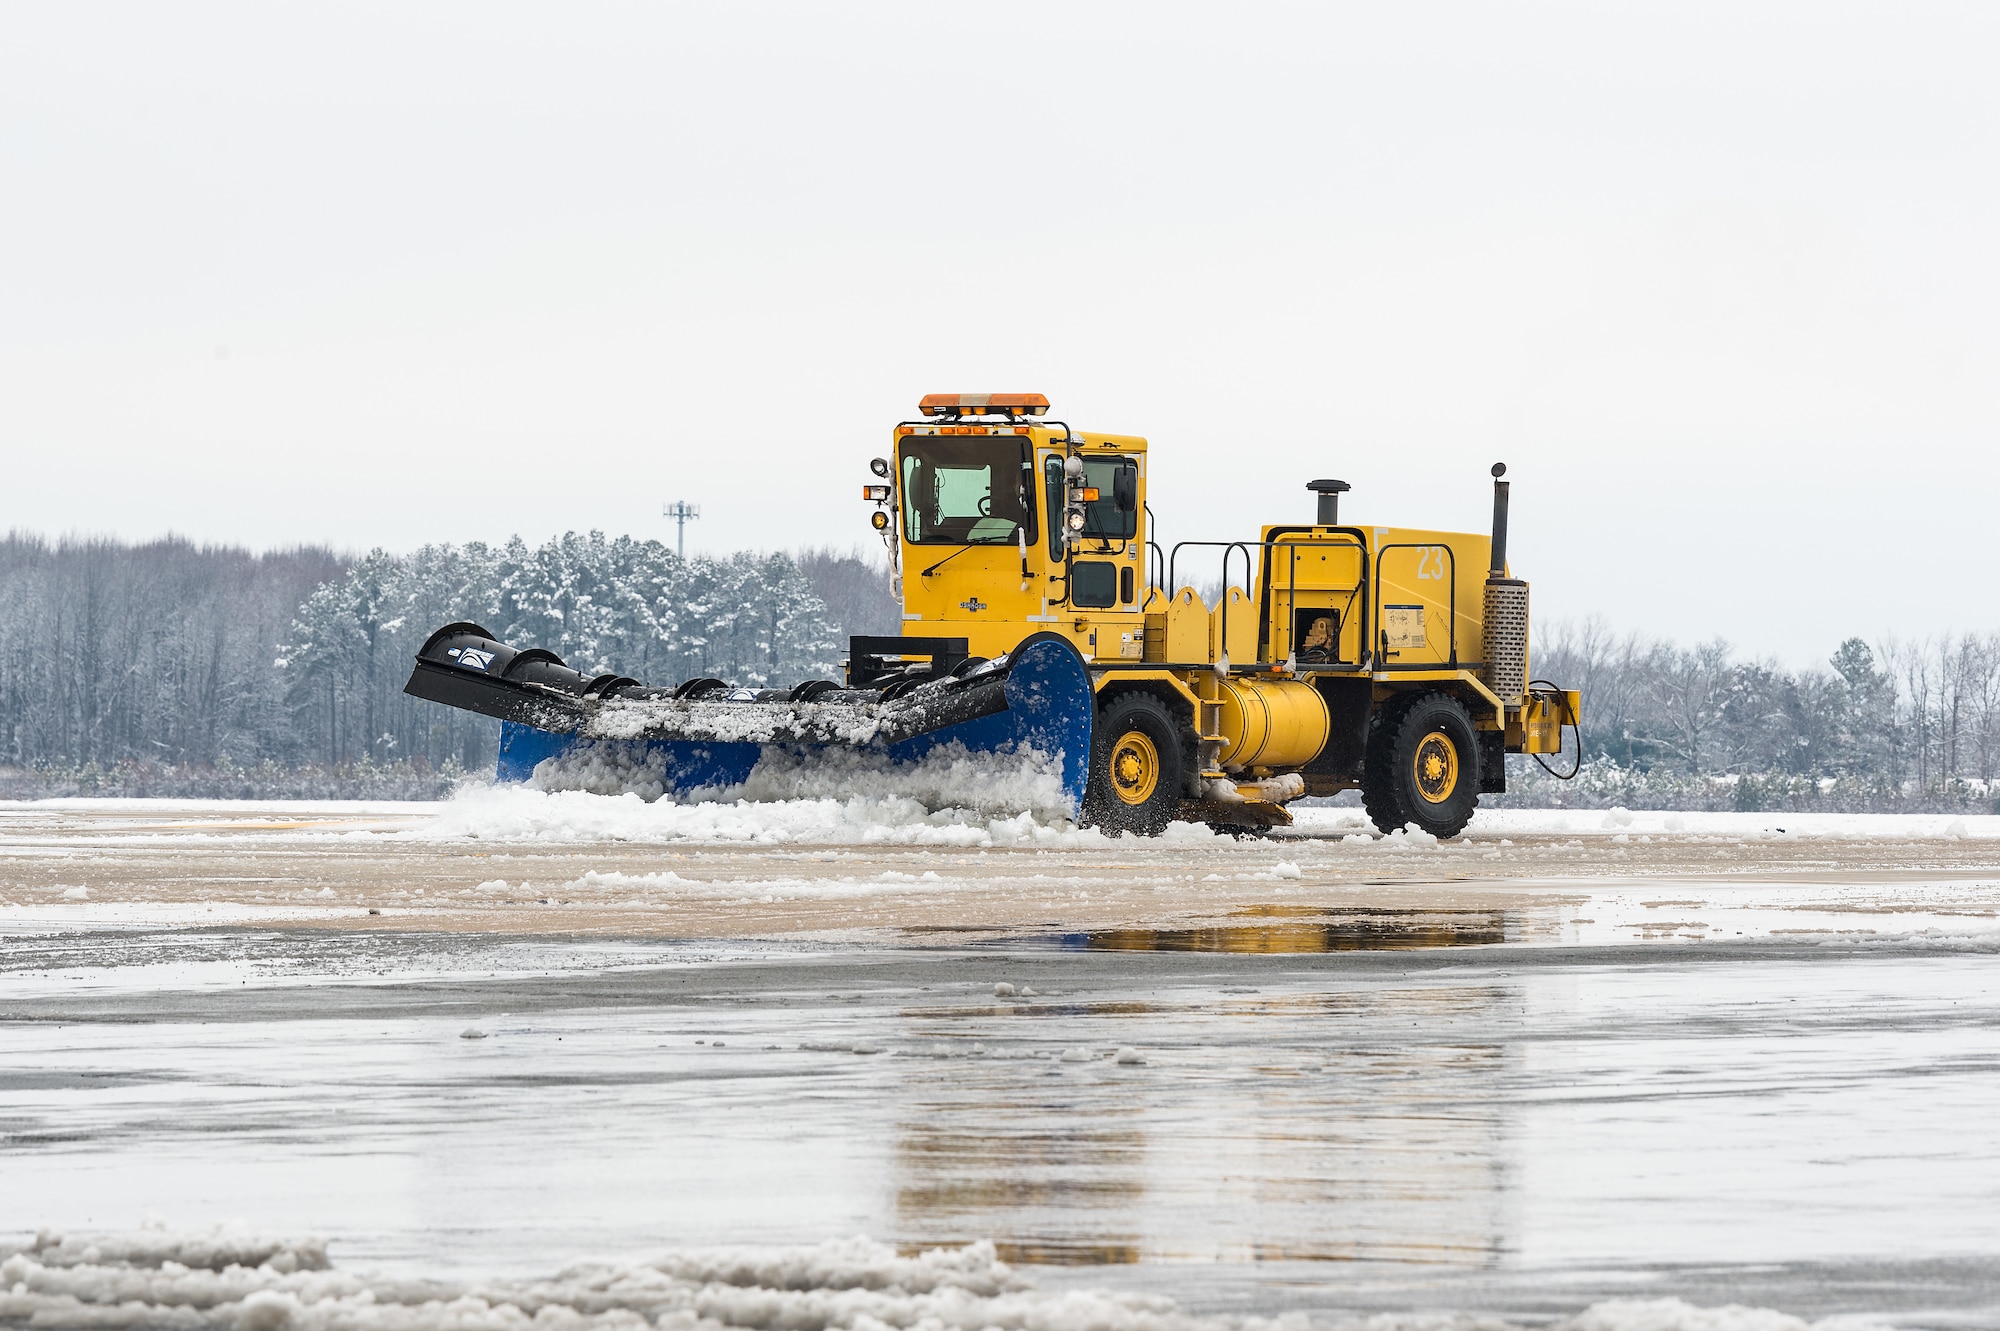 A 436th Civil Engineer Squadron snowplow clears snow from the flight line at Dover Air Force Base, Delaware, Feb. 11, 2021. As Winter Storm Roland produced a wintry mix of precipitation, the base continued normal operations and prepared for additional forecast snowfall. (U.S. Air Force photo by Roland Balik)